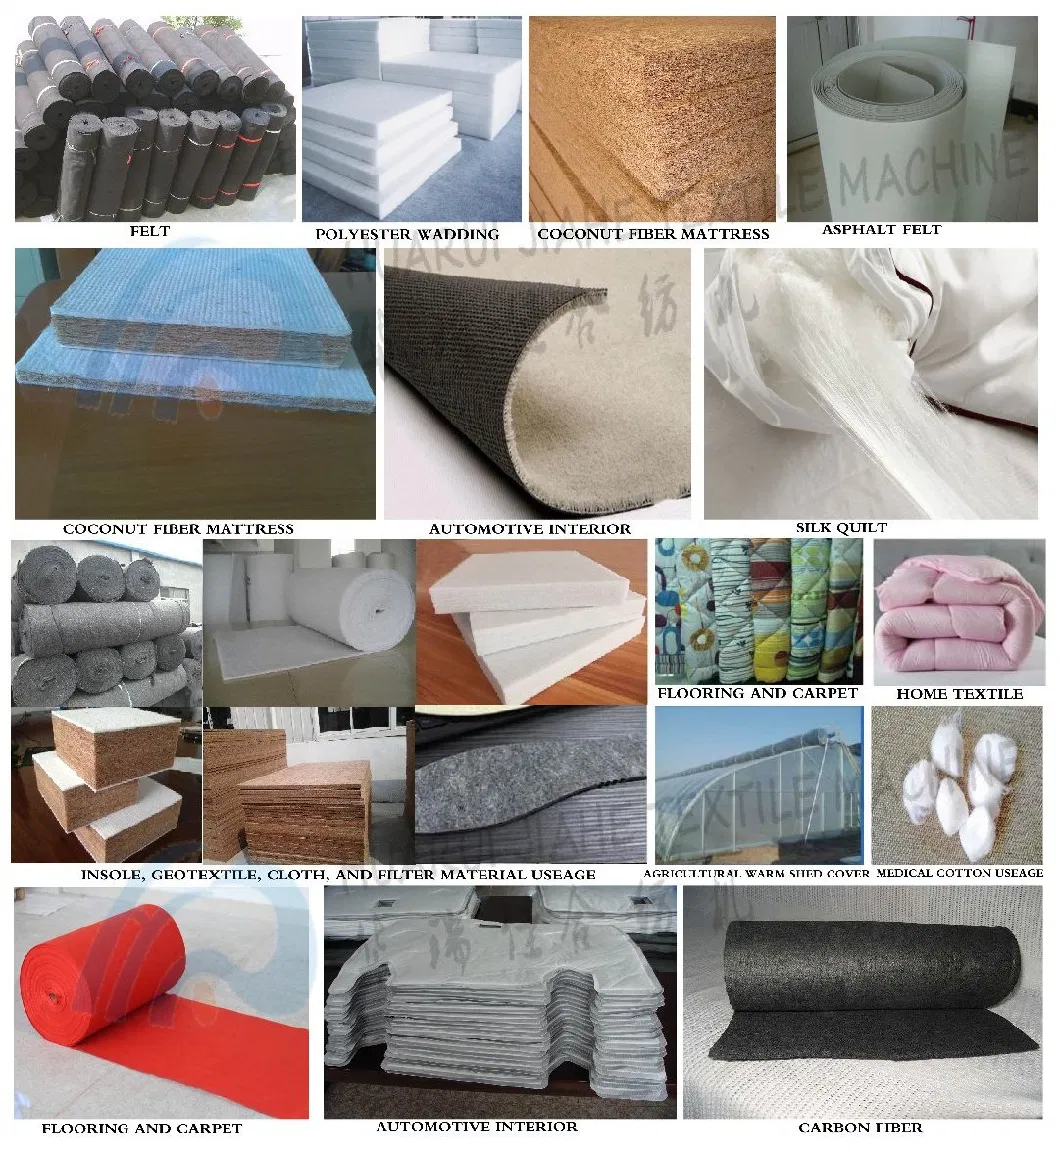 Non-Woven Machines Needle-Punched Felt for Industrial Use,Interlining Car Interior Felt Carpet Geotextile Making Machine,Needle Punched Glass Fibber Felt 